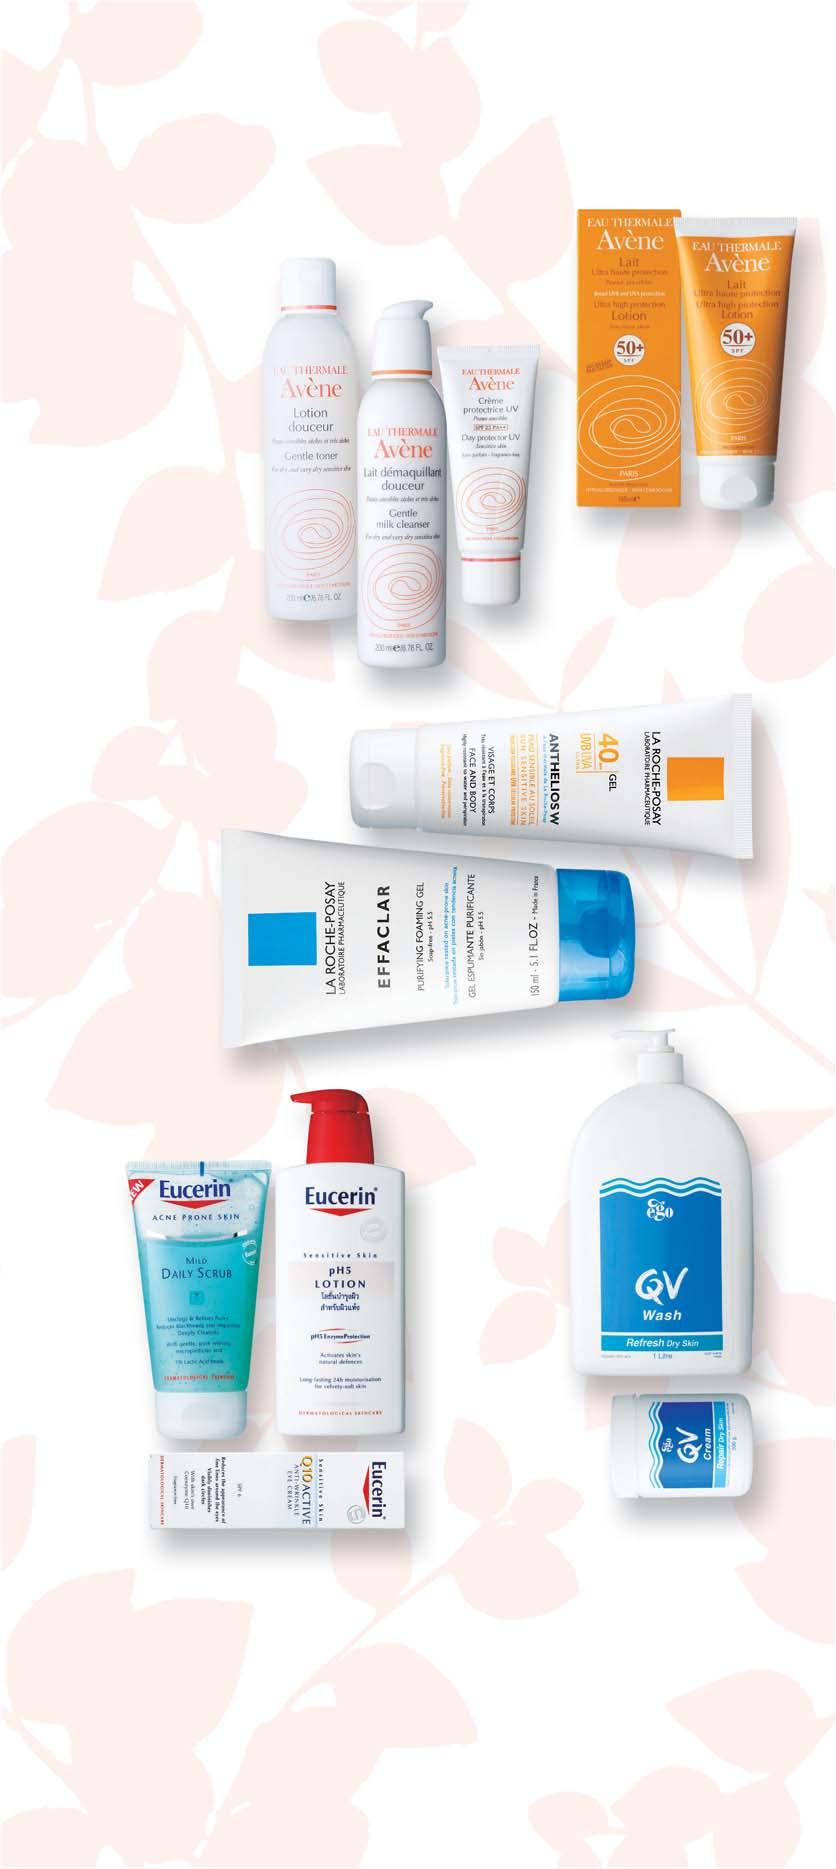 More radiance 5-piece gift set 3 1 HS 2 HS Eucerin Shampoo worth $15.20 with every $40 purchase 5 4 1. Avene Gentle Milk Cleanser 200ml + Avene Gentle Toner 200ml + Avene Day Protector SPF25 40ml $69.